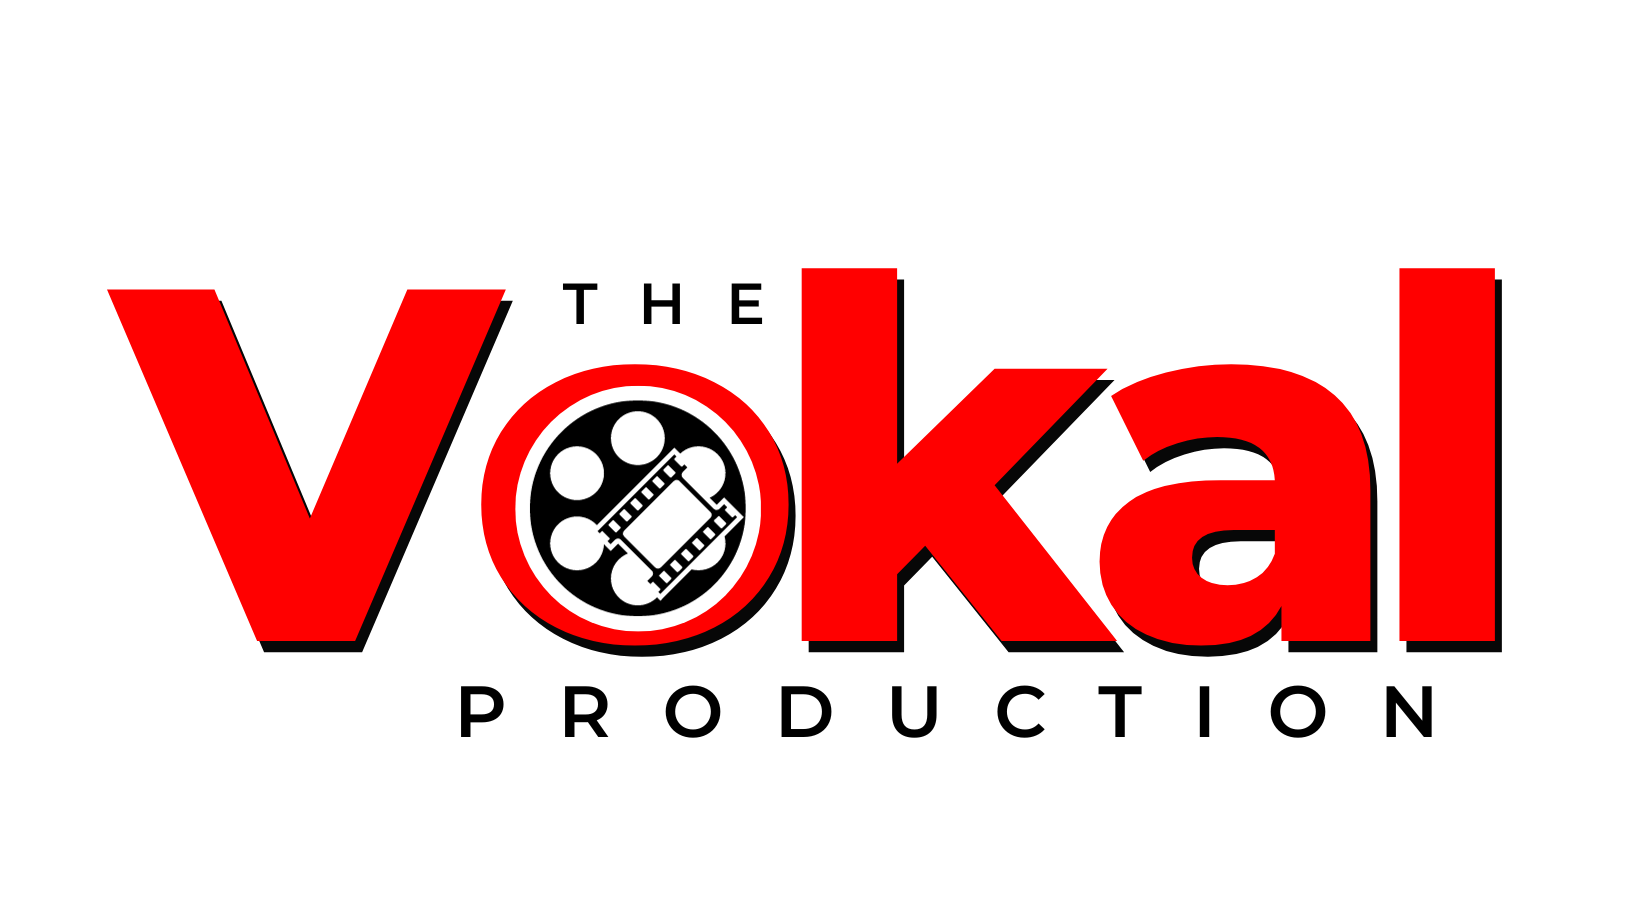 THE VOKAL